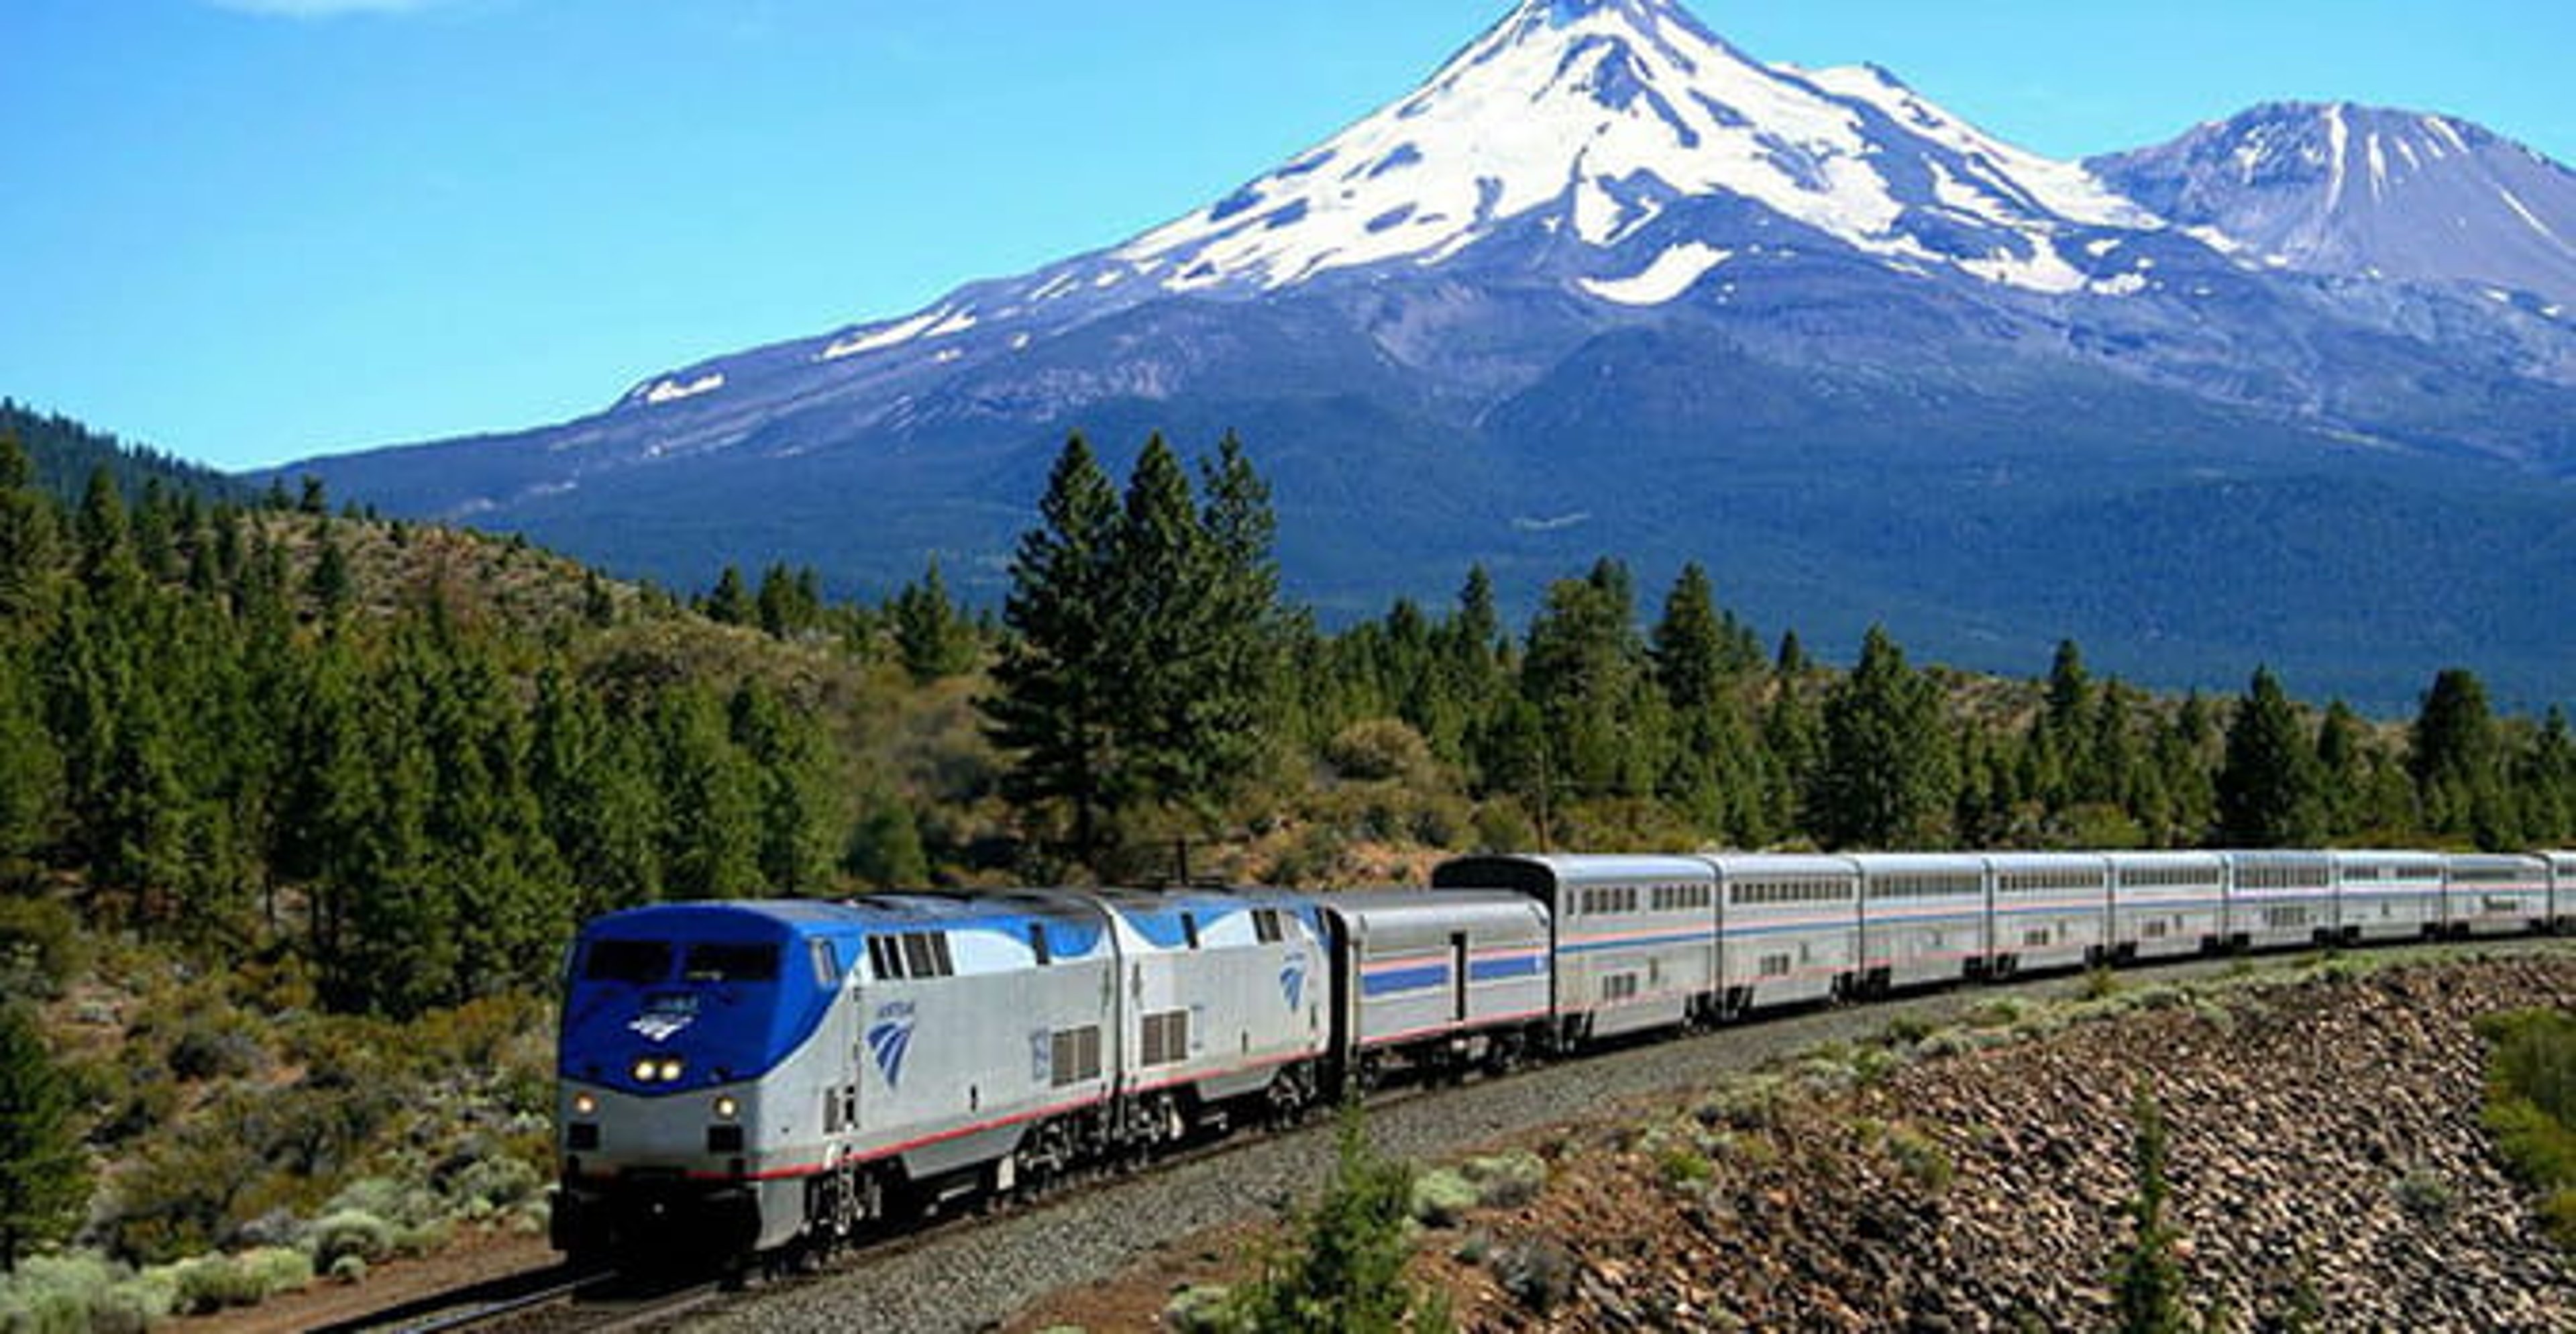 Amtrak train with a mountain in the background